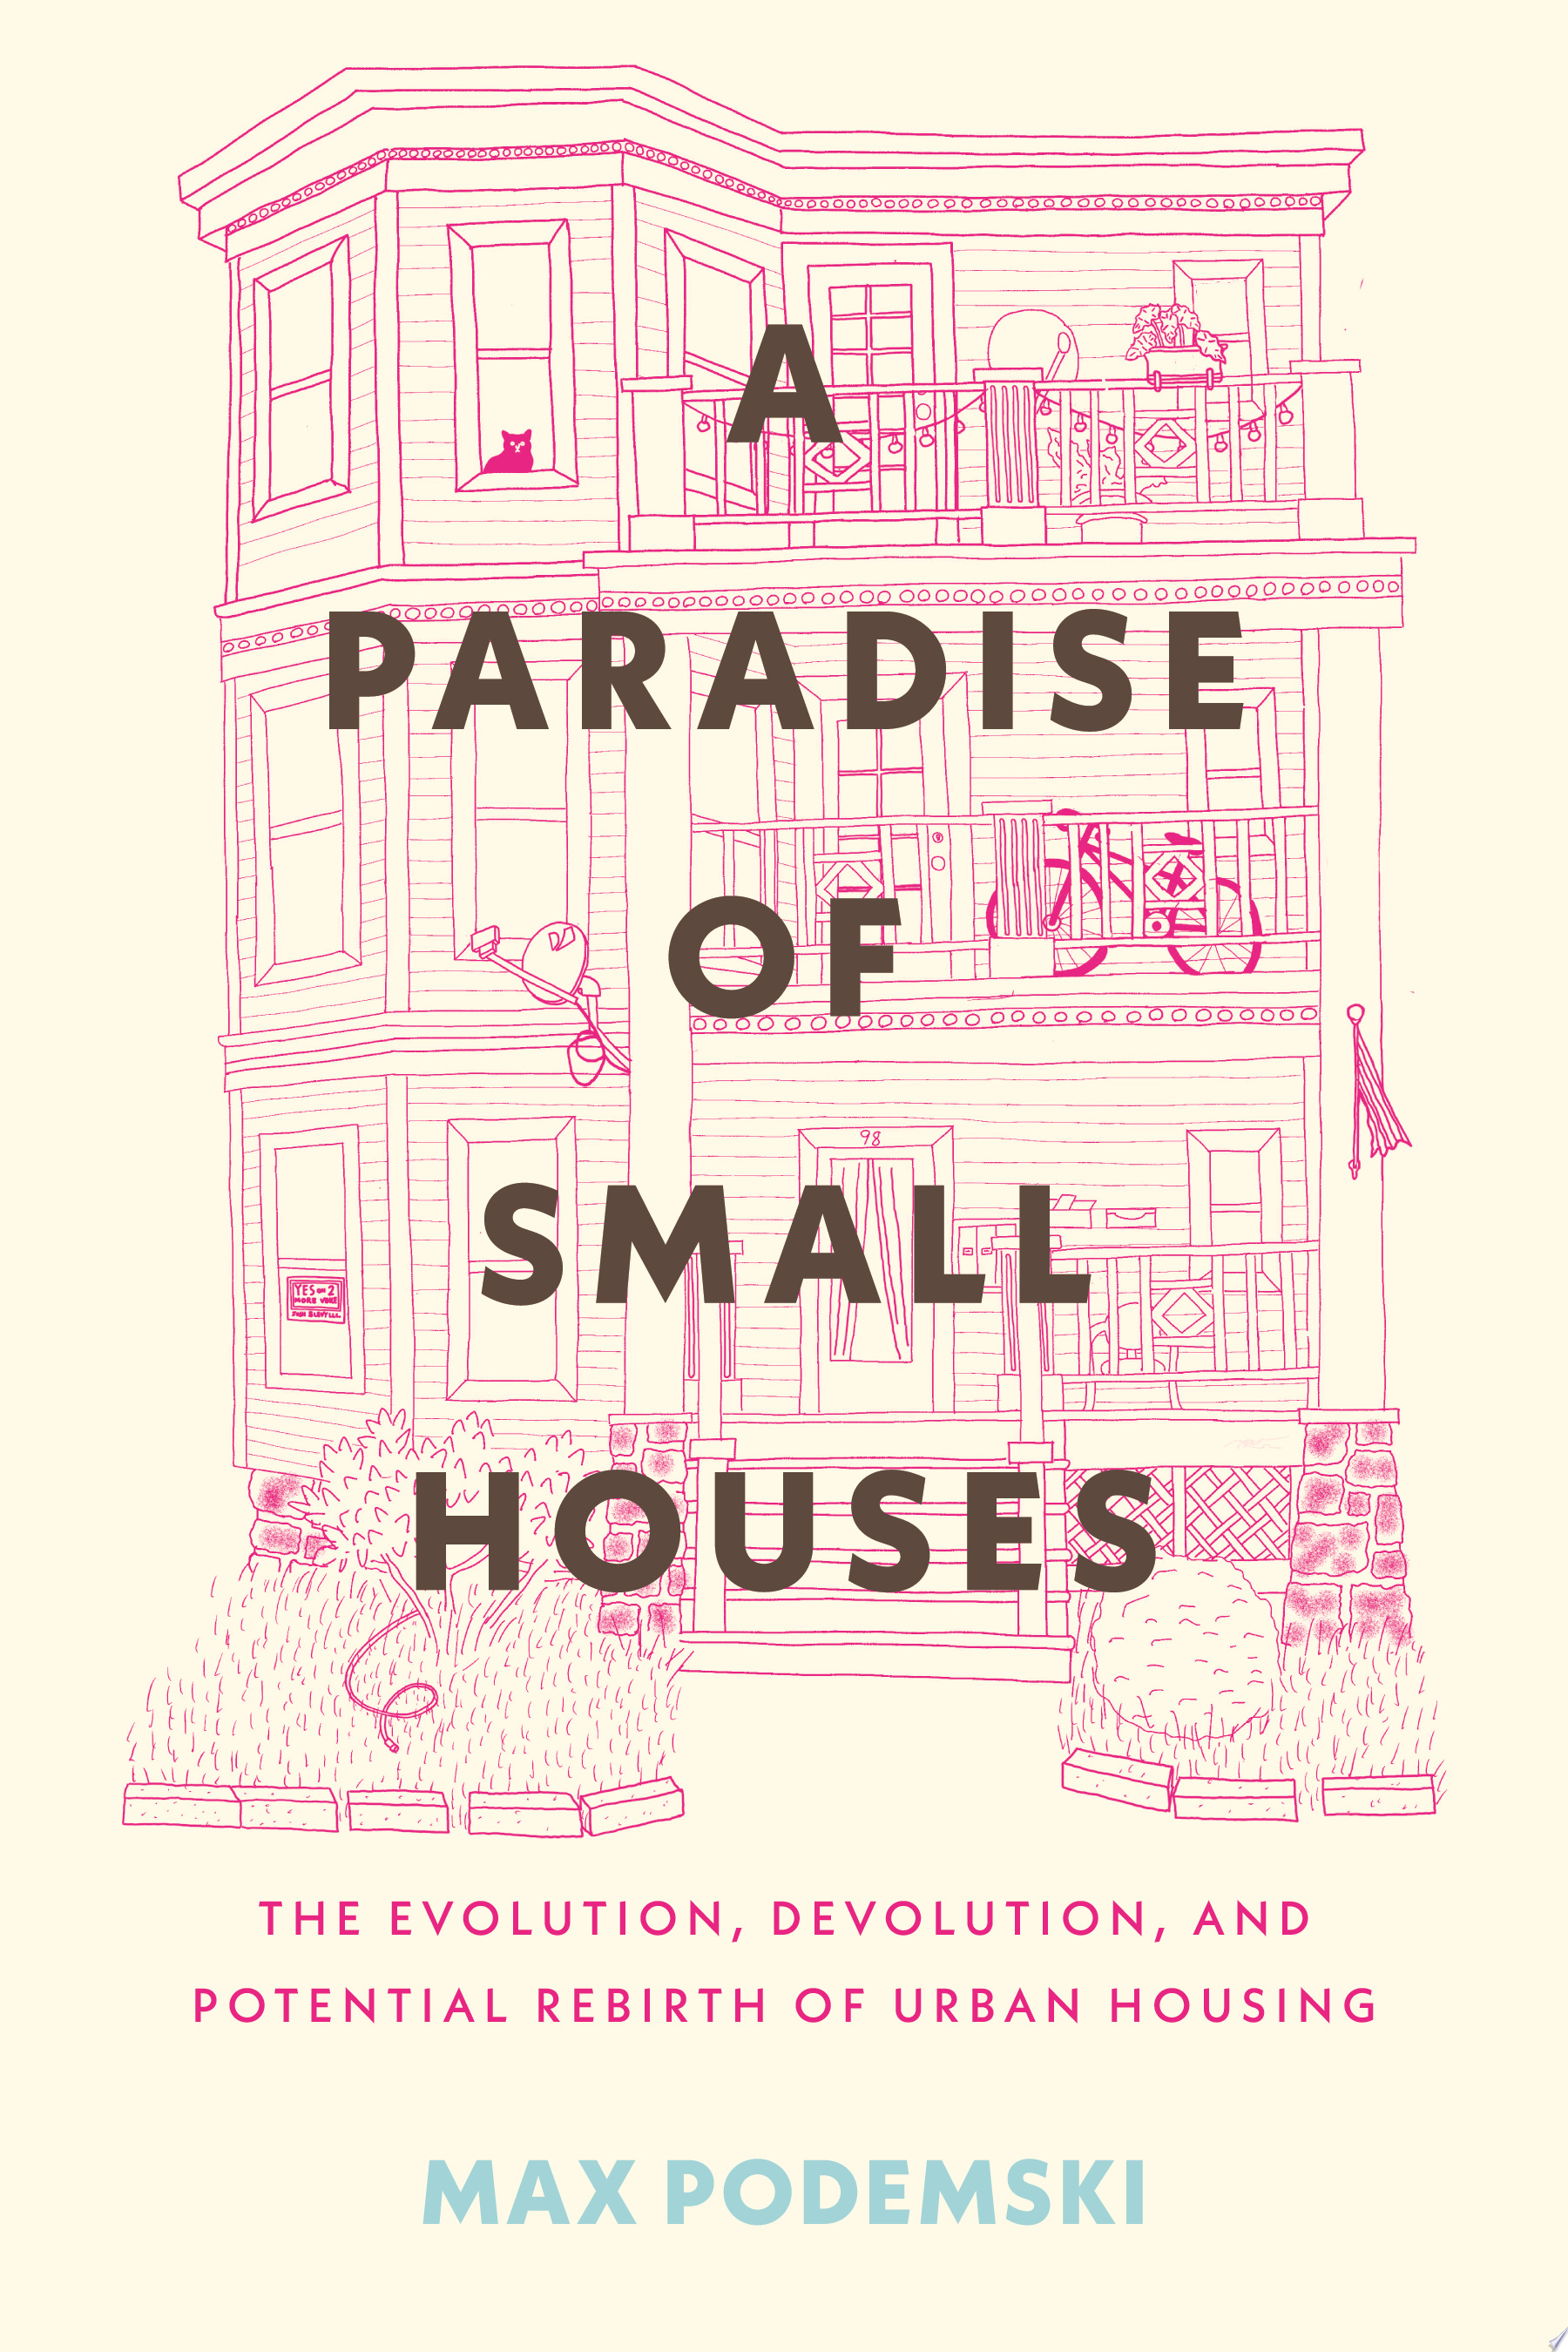 Image for "A Paradise of Small Houses"